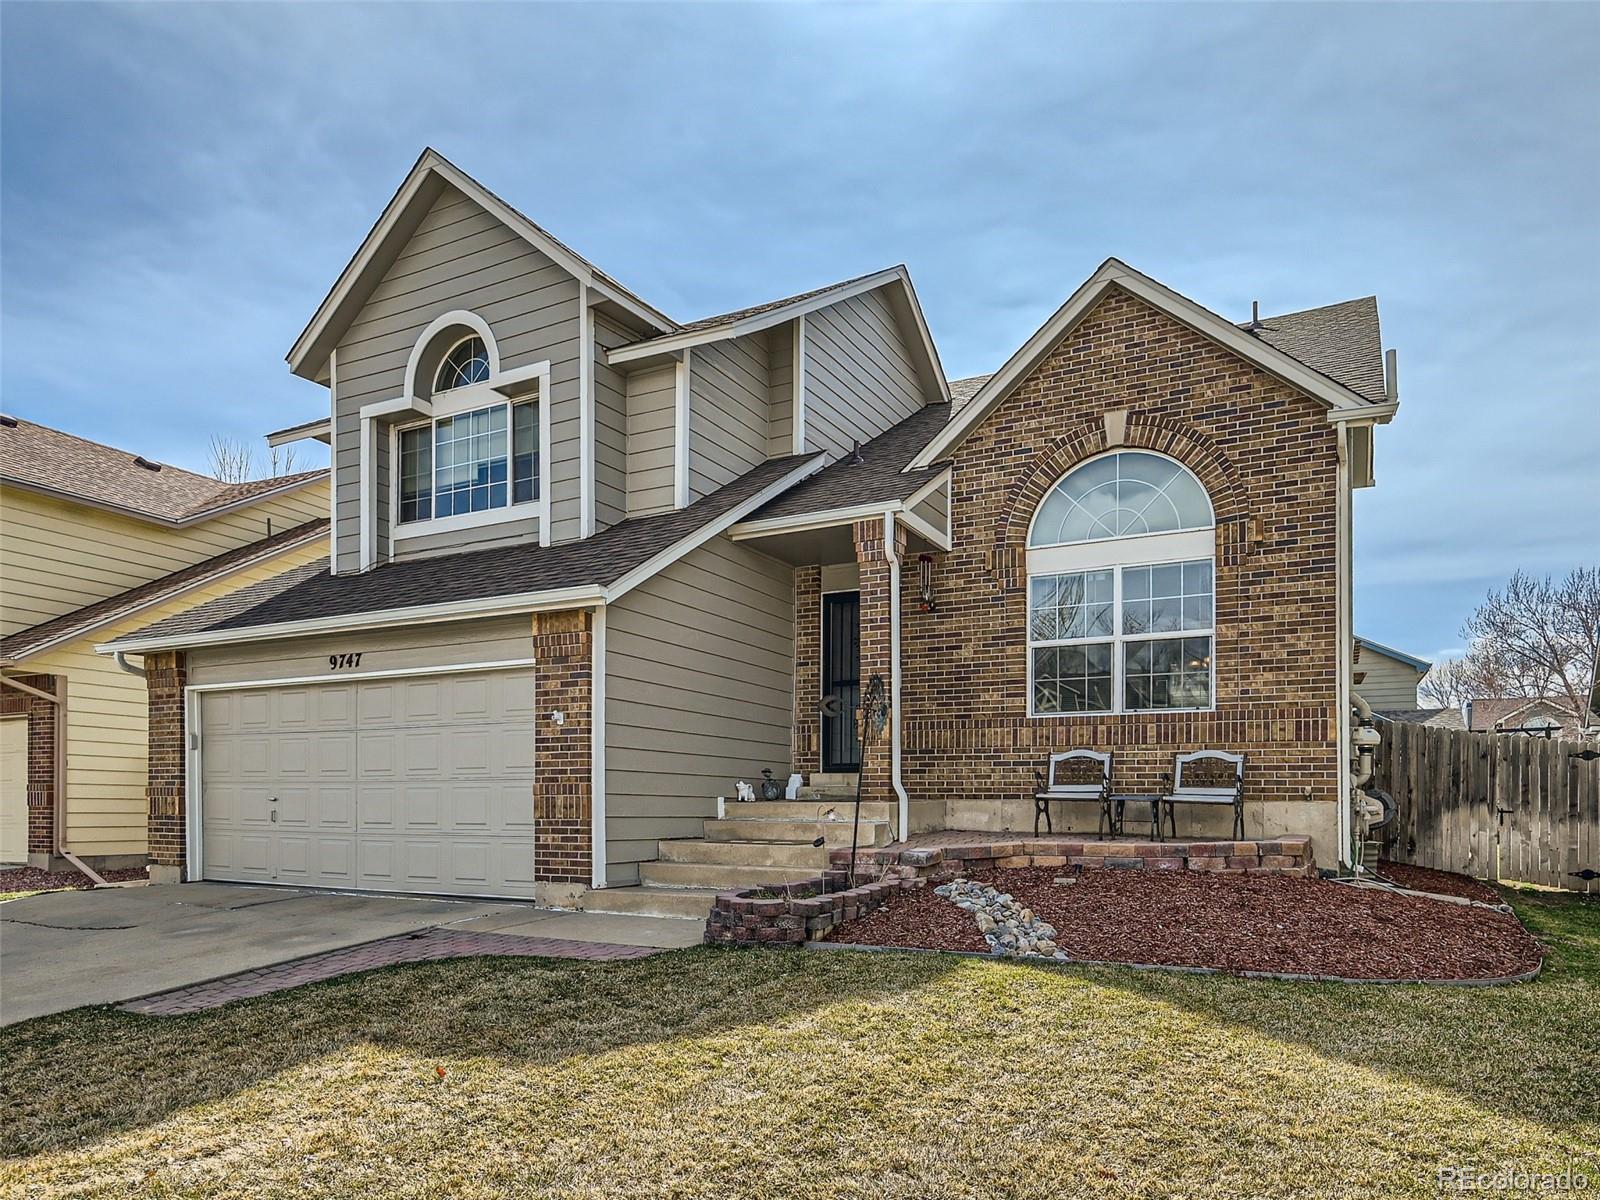 Report Image for 9747  Jellison Street,Westminster, Colorado